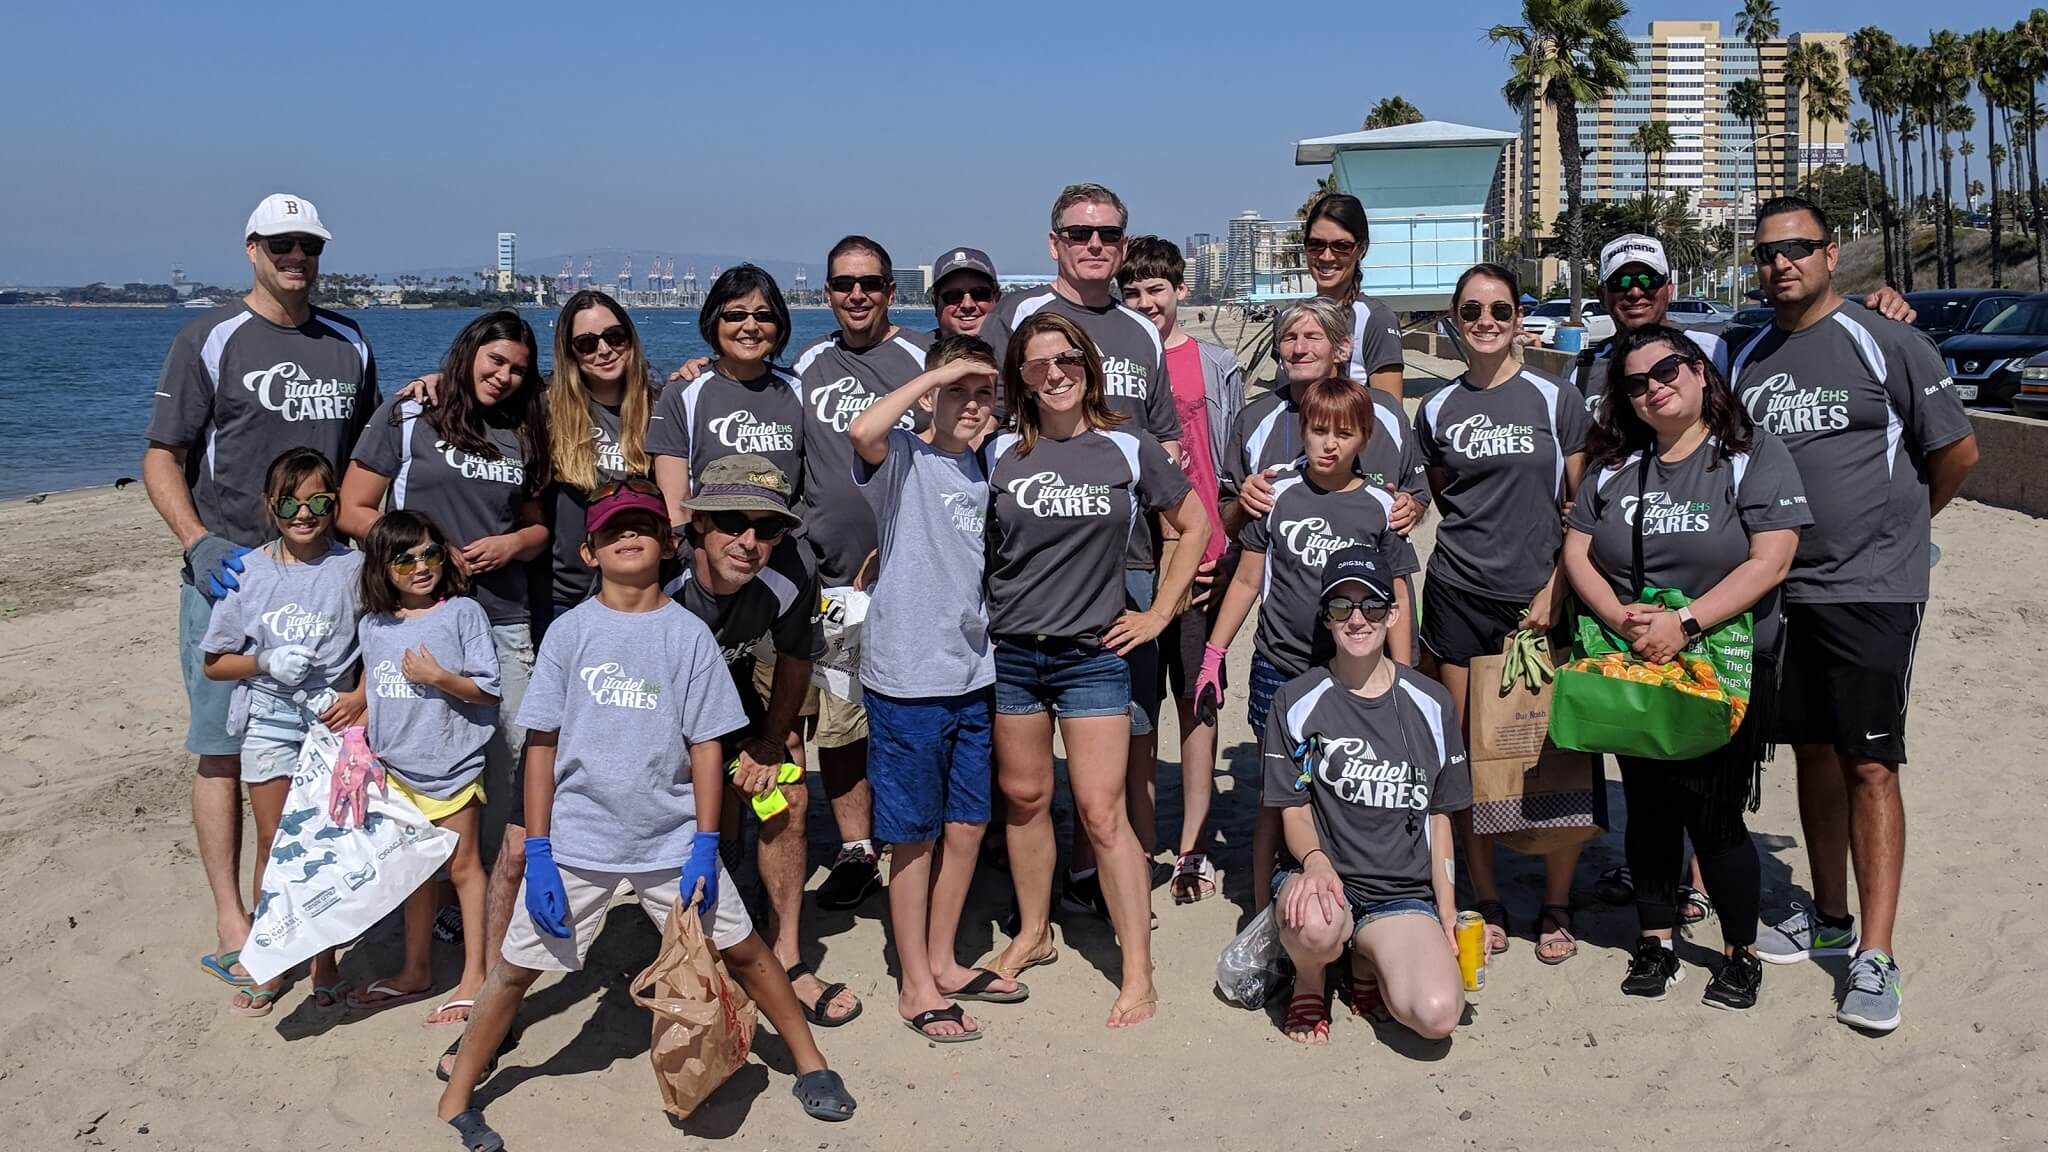 Citadel Cares Beach Clean up, earth day